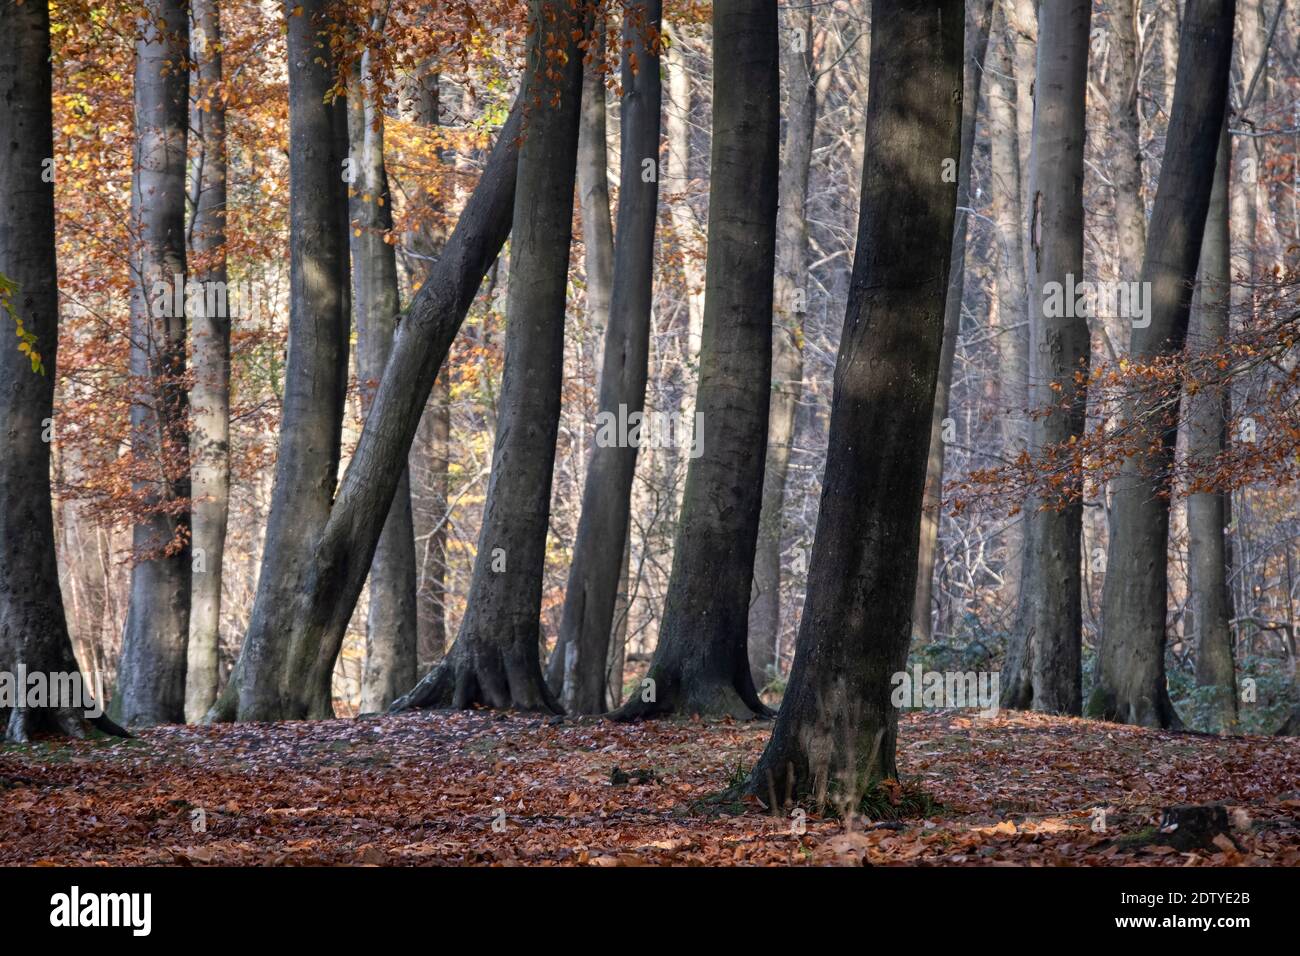 Beech Trees in Delamere Forest in autumn, Delamere Forest, Cheshire, England, UK Stock Photo